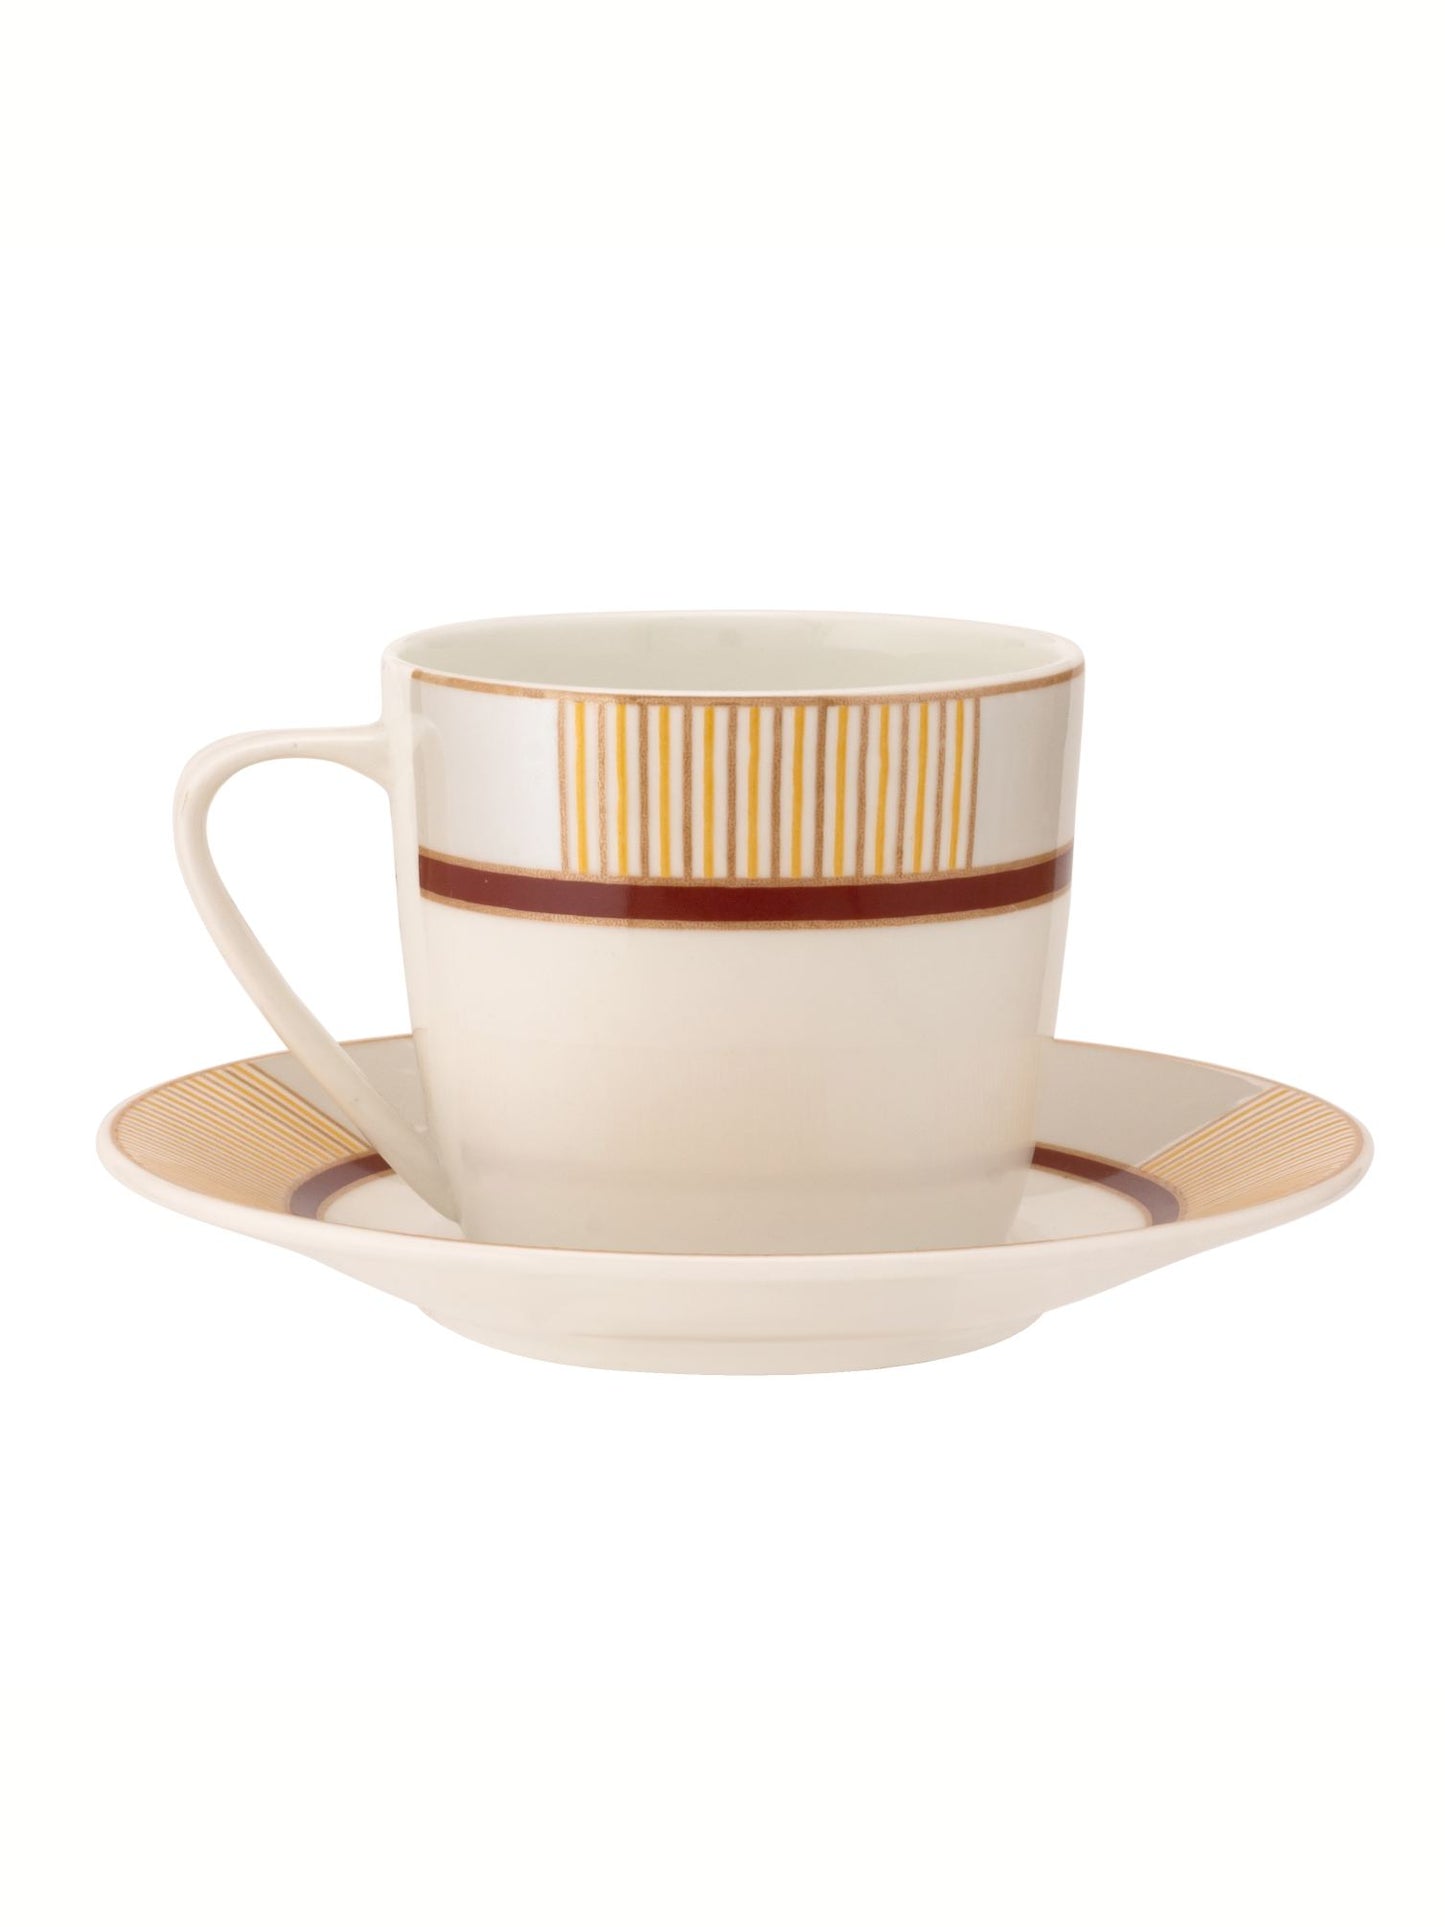 Cheers Super Cup & Saucer, 170 ml, Set of 12 (6 Cups + 6 Saucers) (S383)